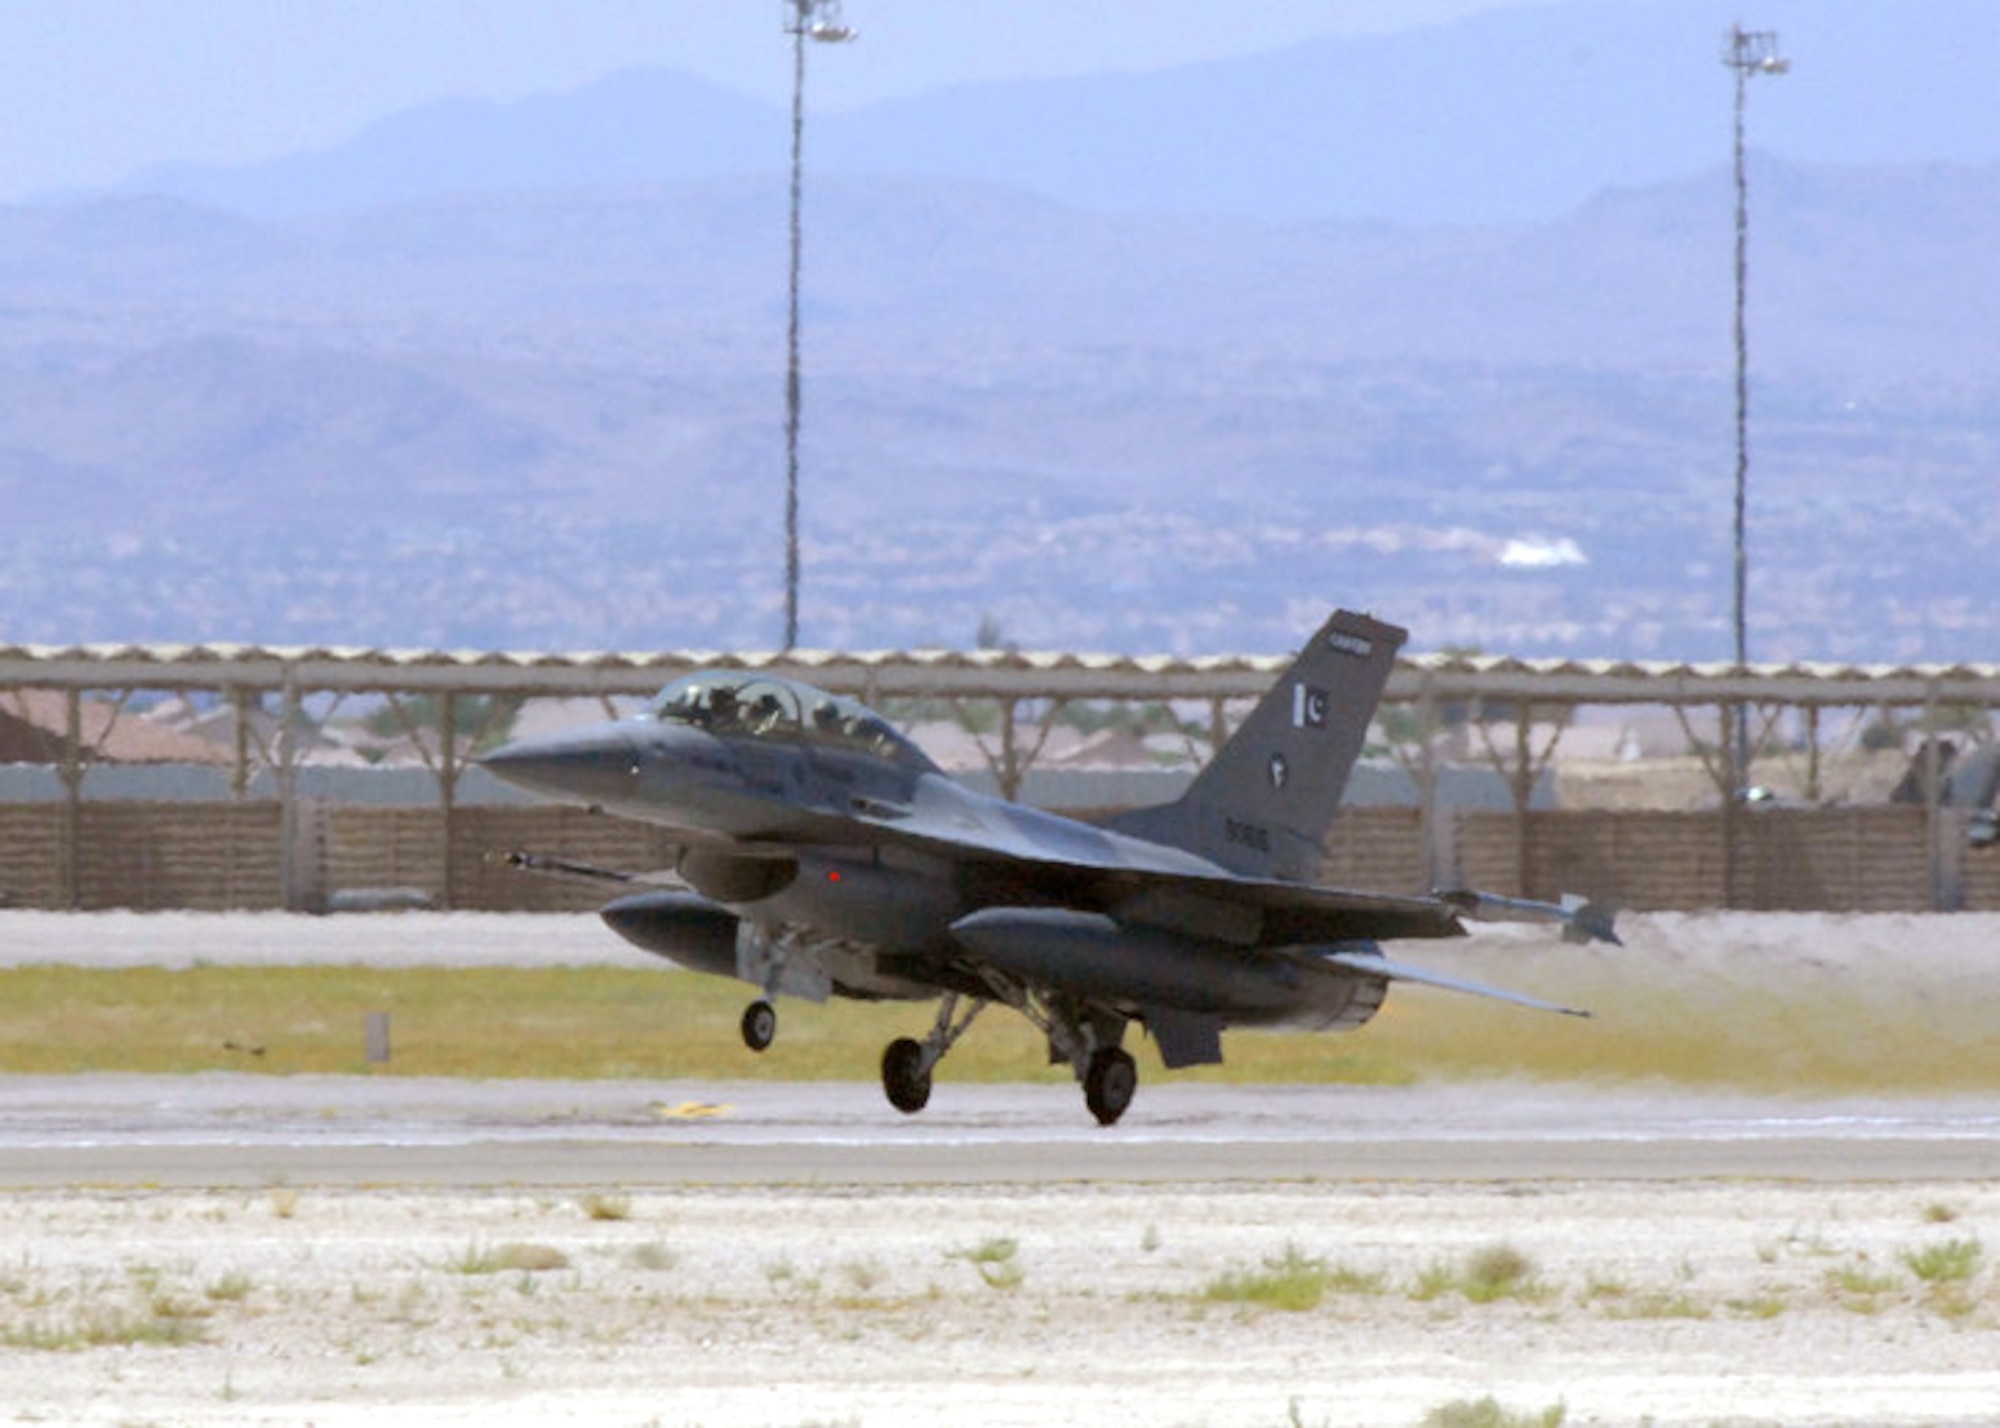 An F-16 from the Pakistan Air Force takes off the runway for Exercise Red Flag 10-4 July 21, 2010, at Nellis Air Force Base, Nev. Red Flag is a realistic combat training exercise involving the air forces of the U.S. and its allies. (U.S. Air Force photo/Airman 1st Class Daniel Phelps)